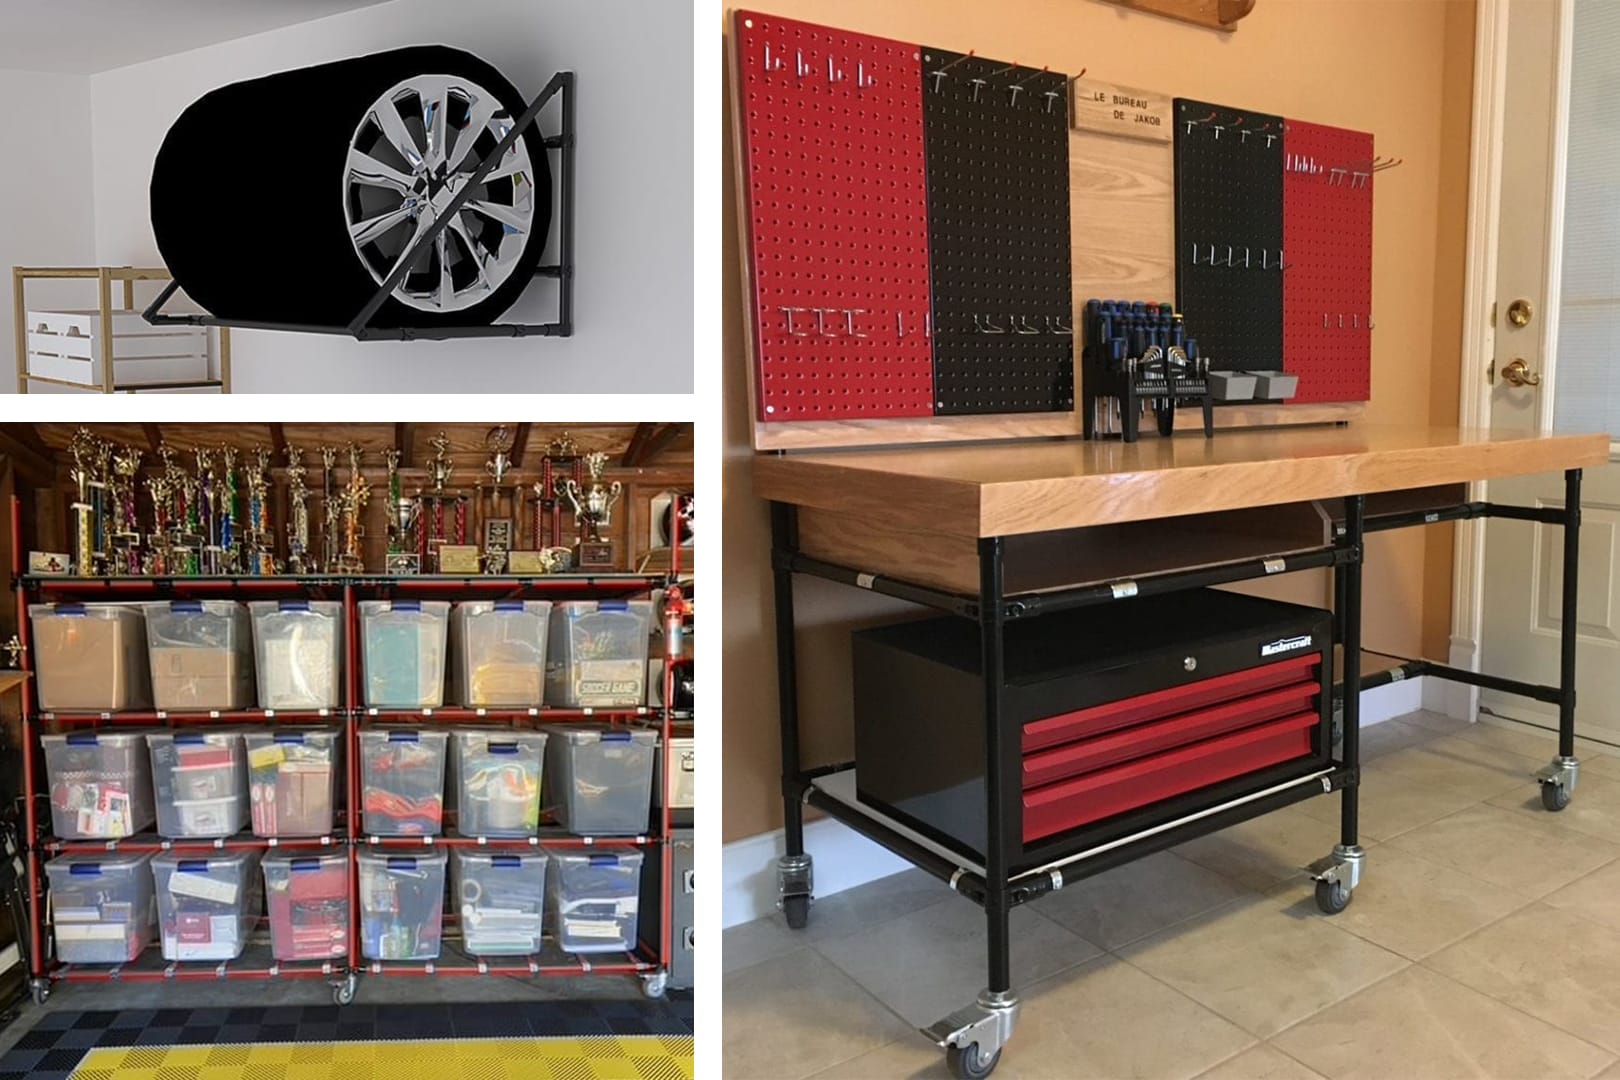 Ultimate Guide: How to Build Garage Storage Shelves and Organize